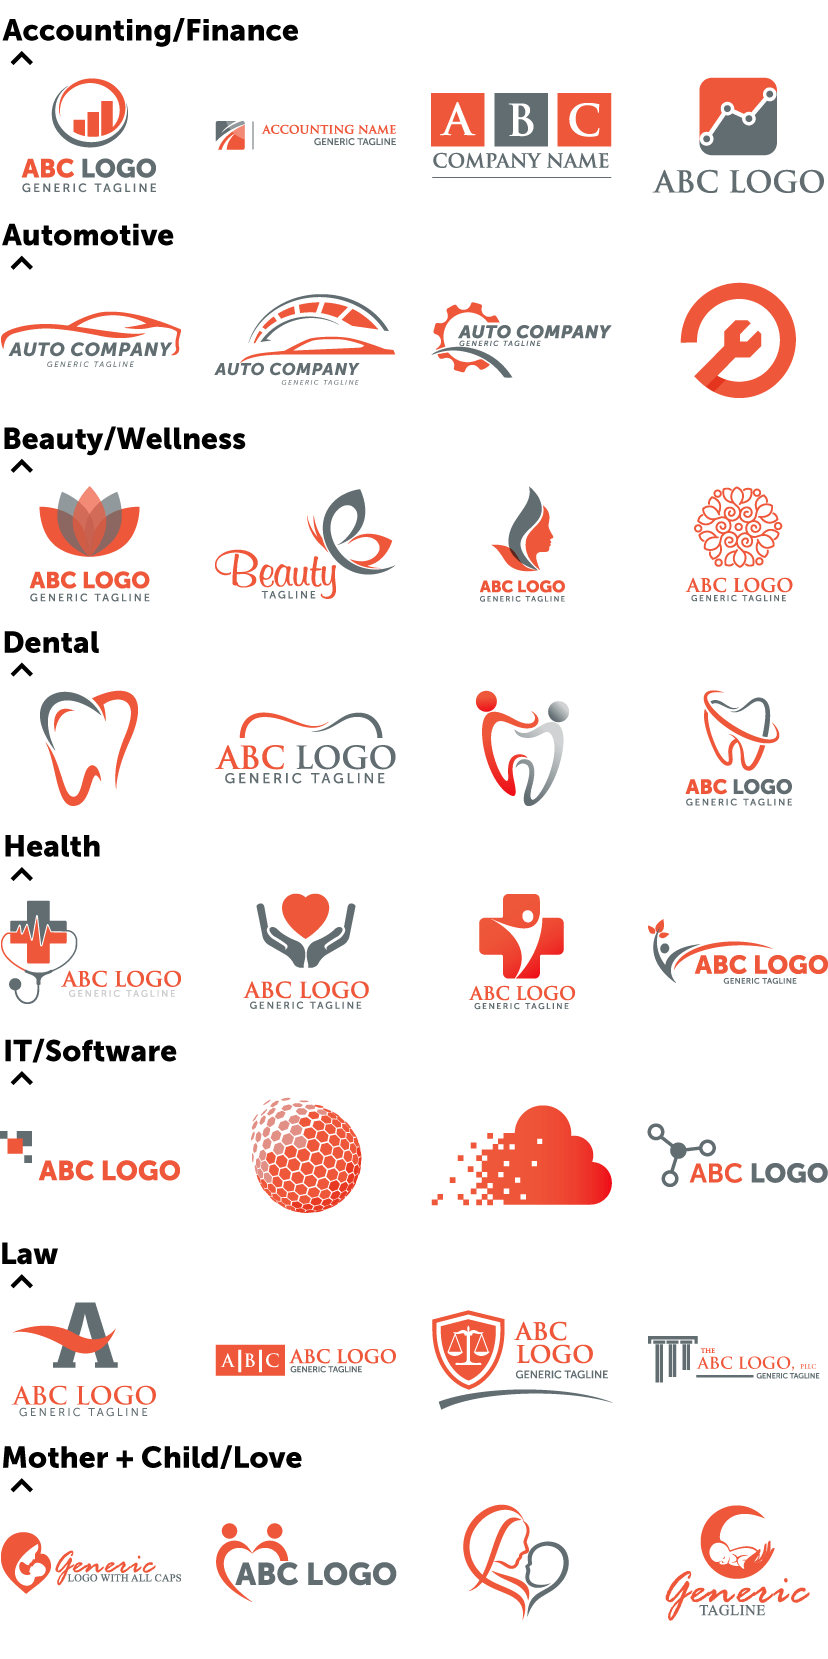 Generic Logo - Generic, common and overused logo concepts and how to avoid them